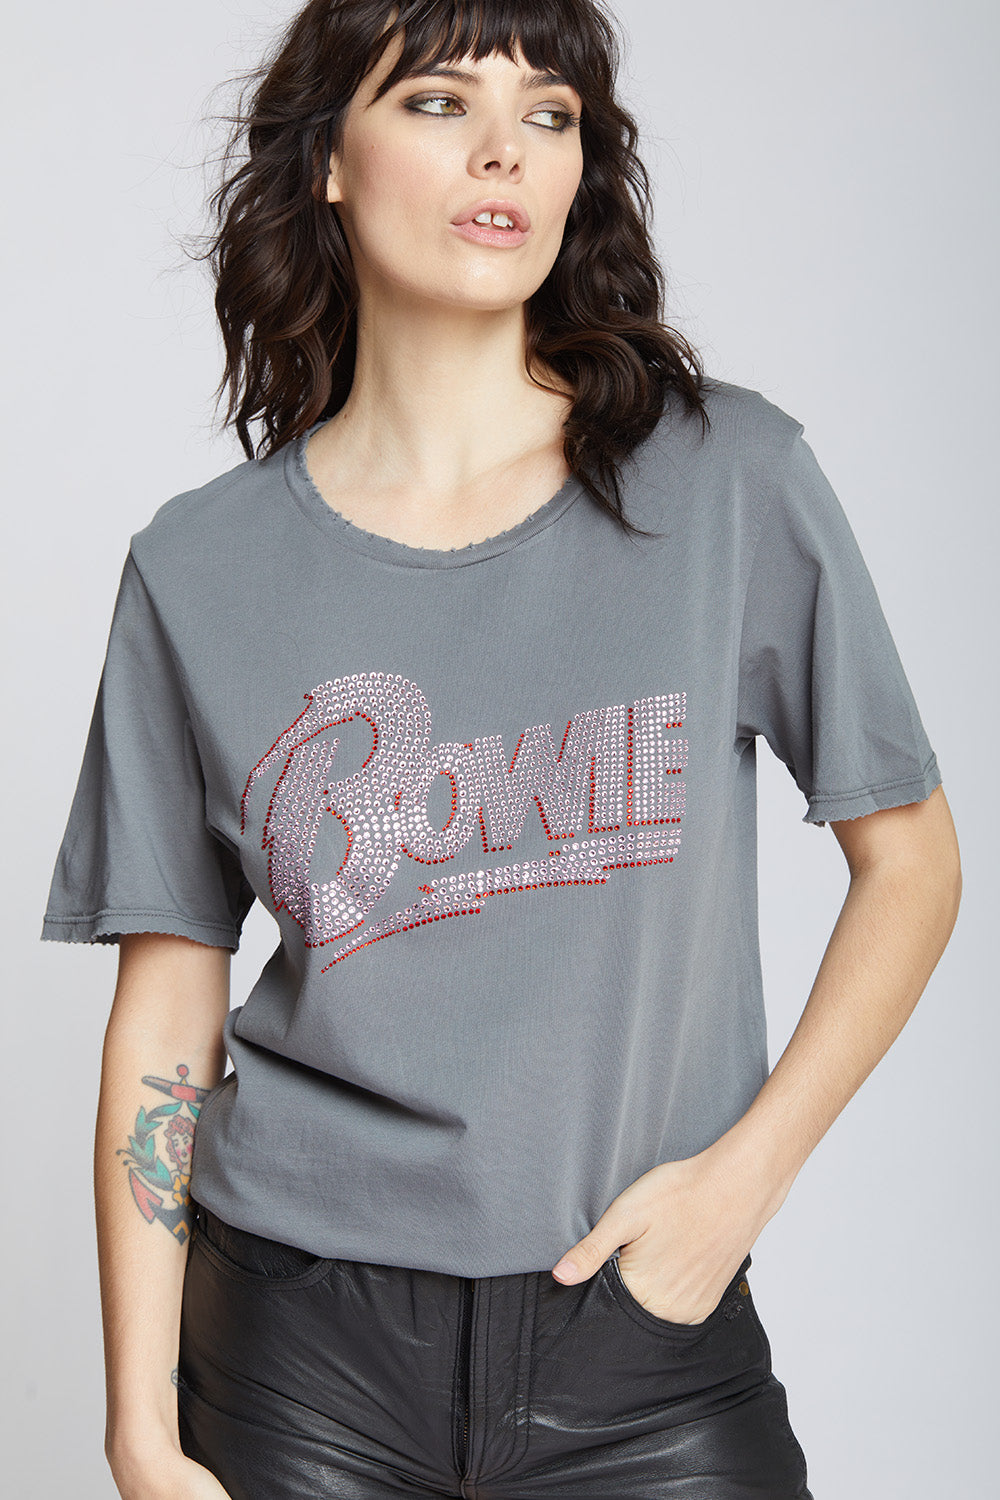 Bowie Bolt Crystal Tee - Recycled Karma Brands